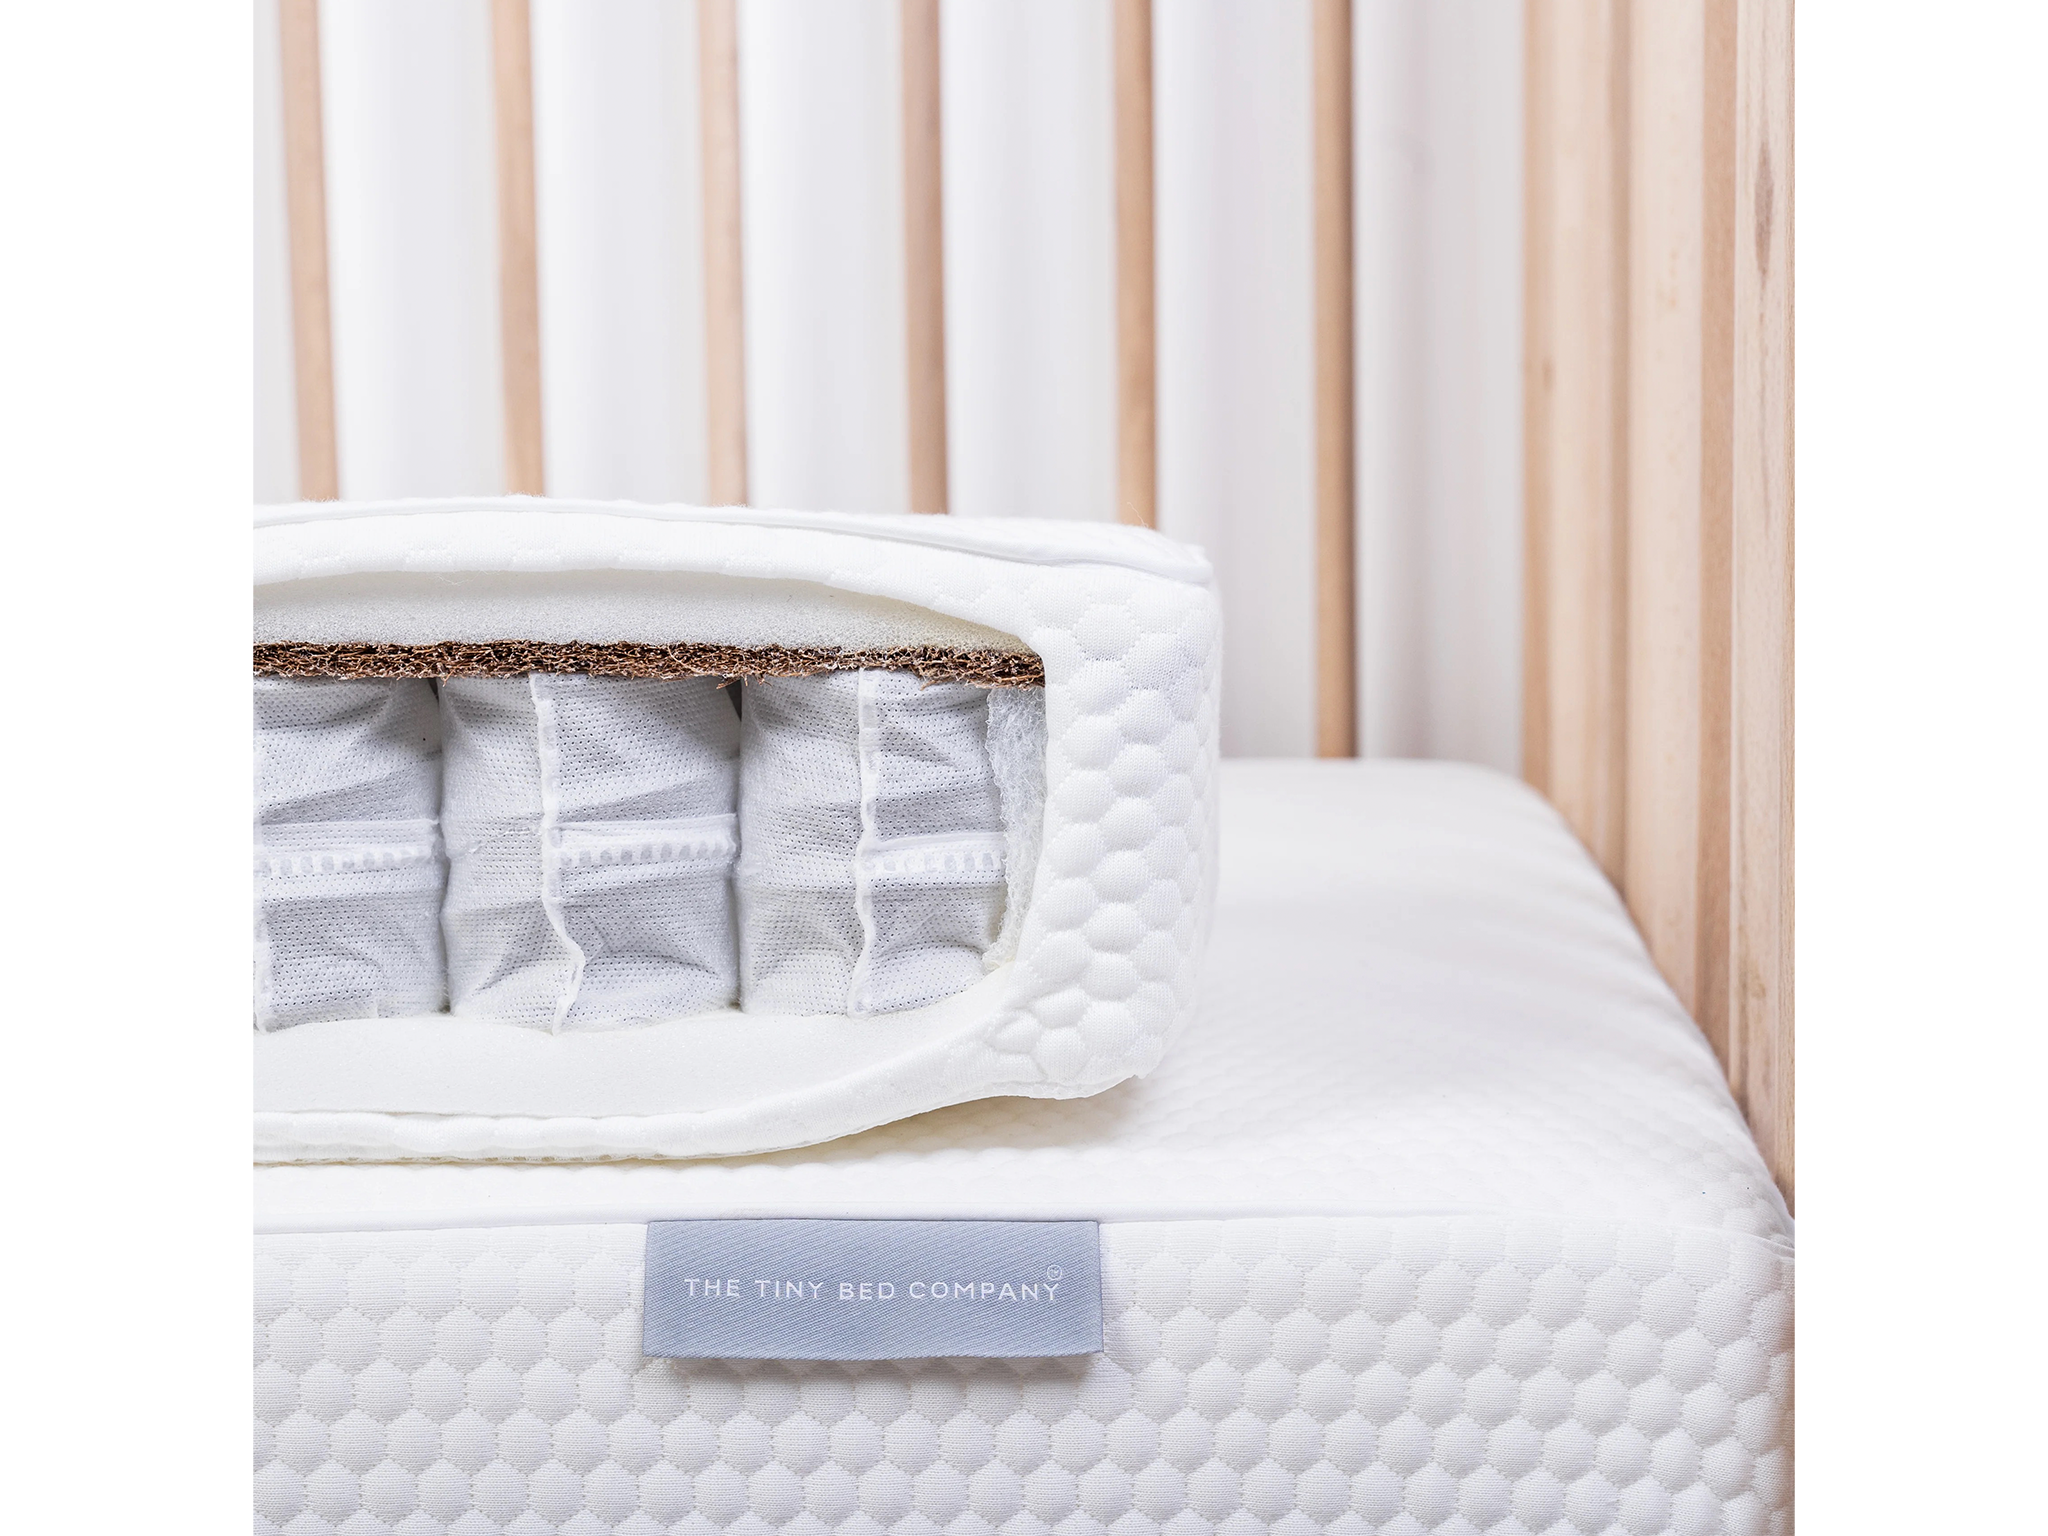 best cot mattress The Tiny Bed Company tiny dreamer deluxe organic coconut and pocket sprung cot bed mattress